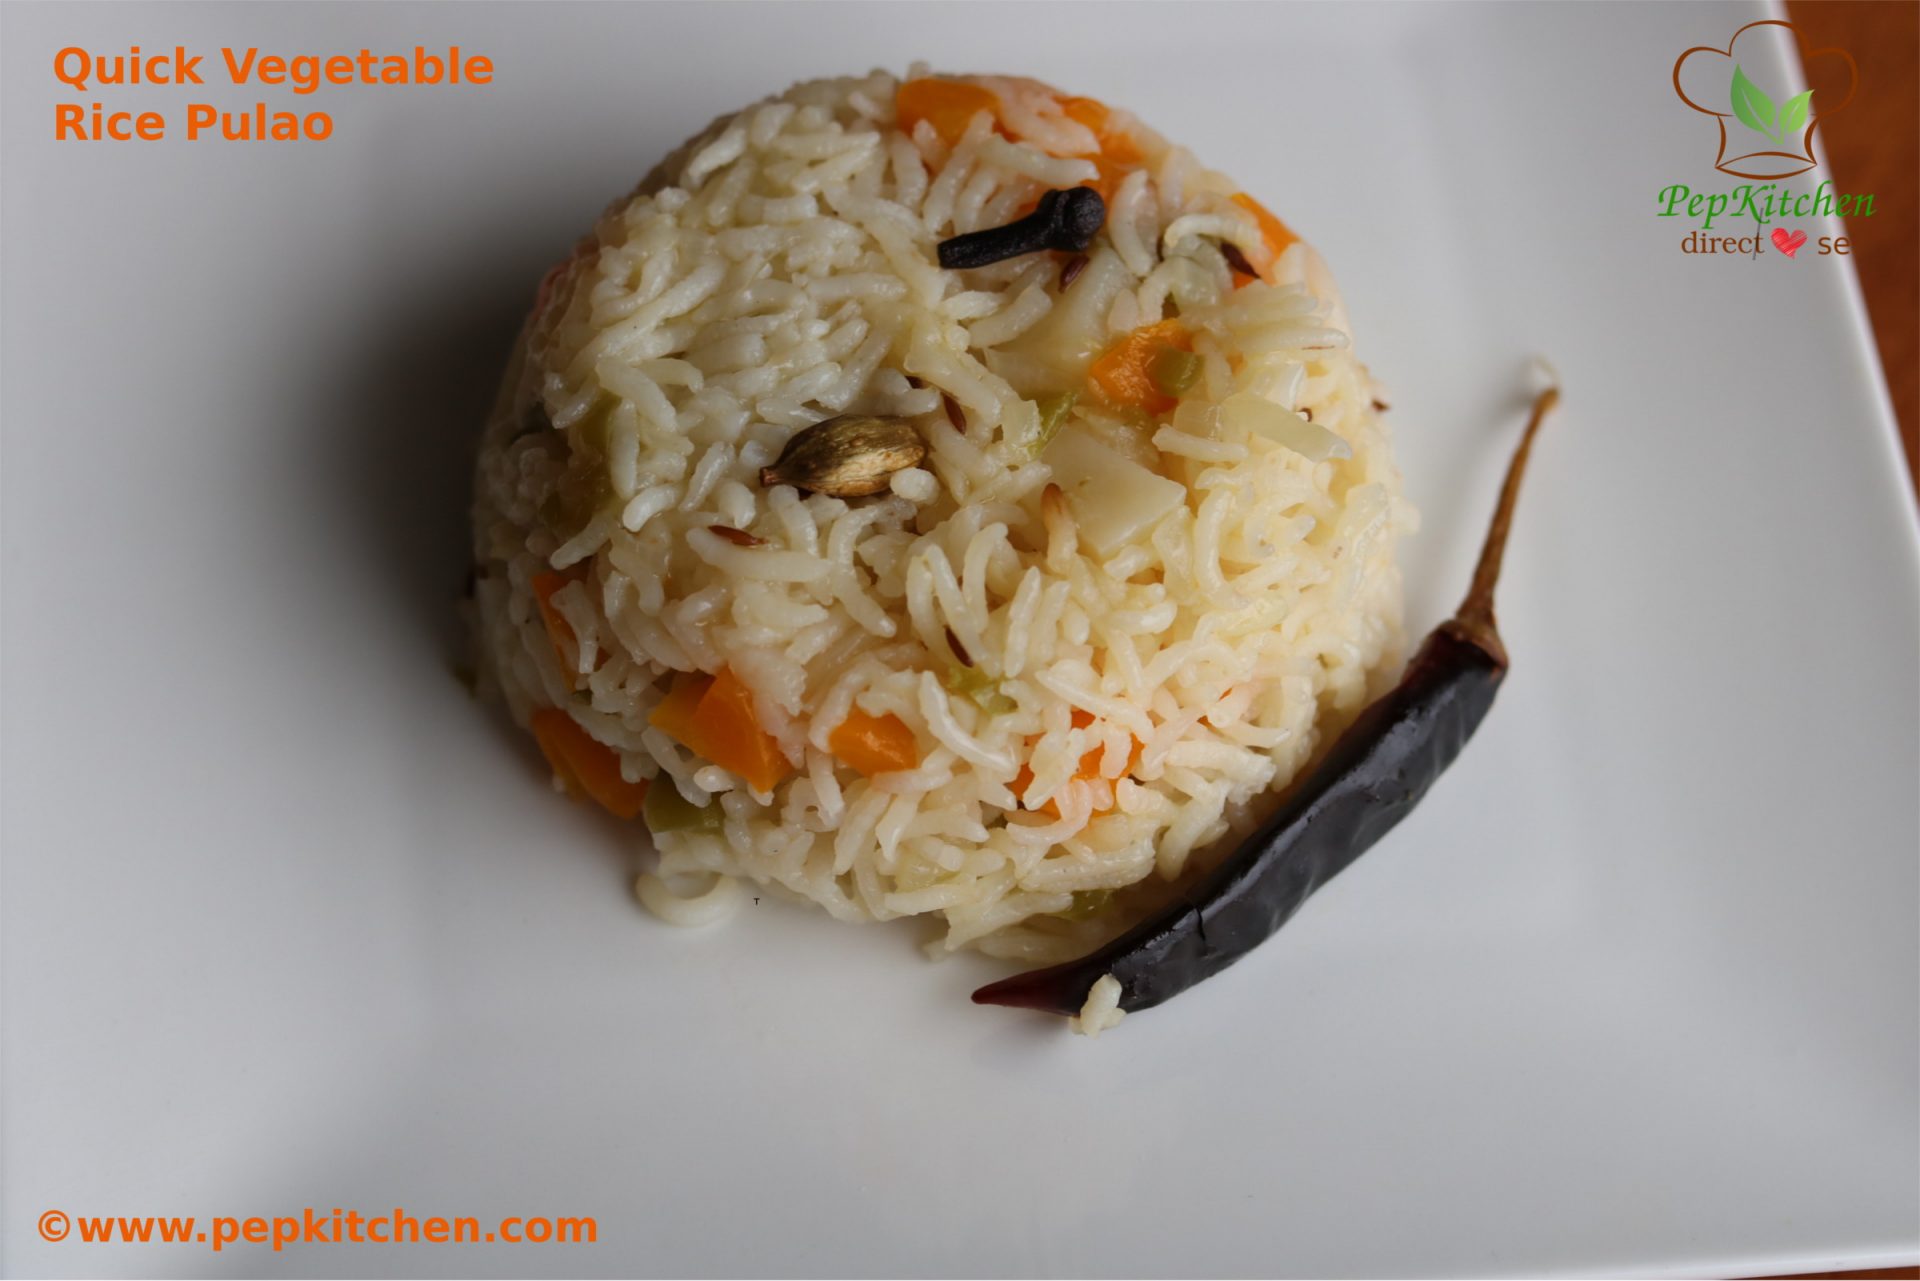 Quick Vegetable Rice Pulao